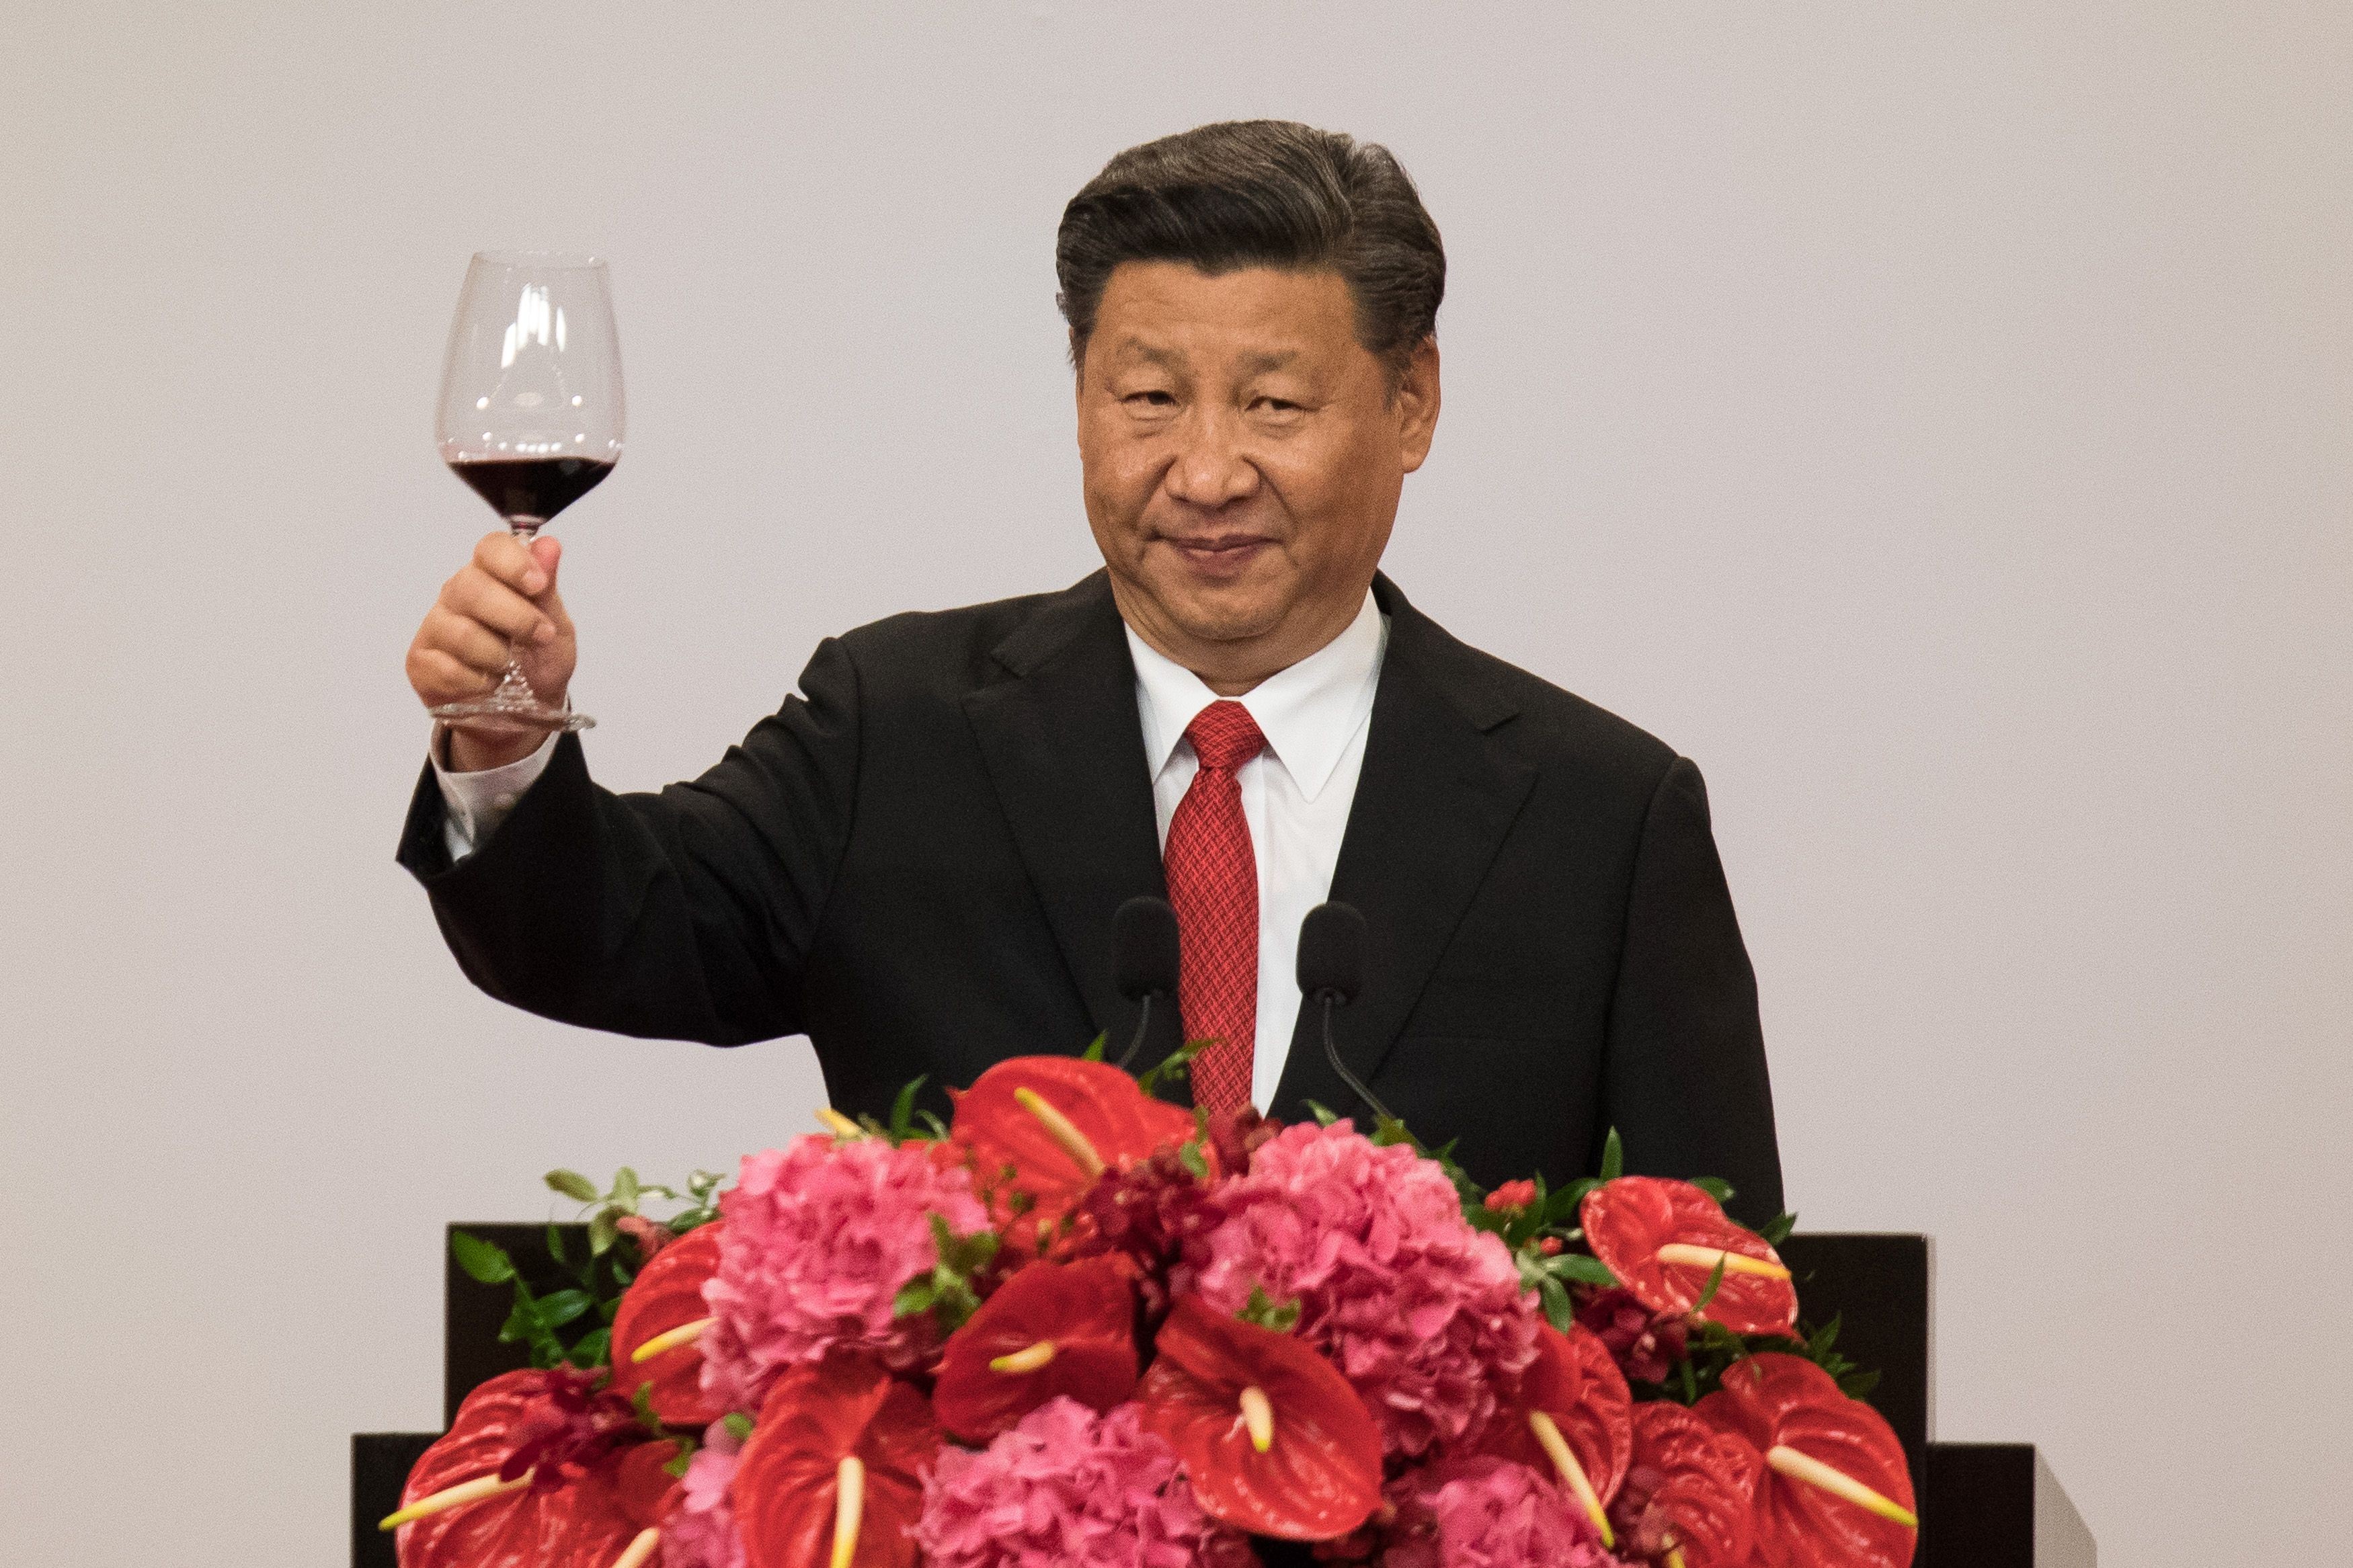 Xi Jinping makes a toast at a banquet in his honour at the Convention Centre. Photo: AFP